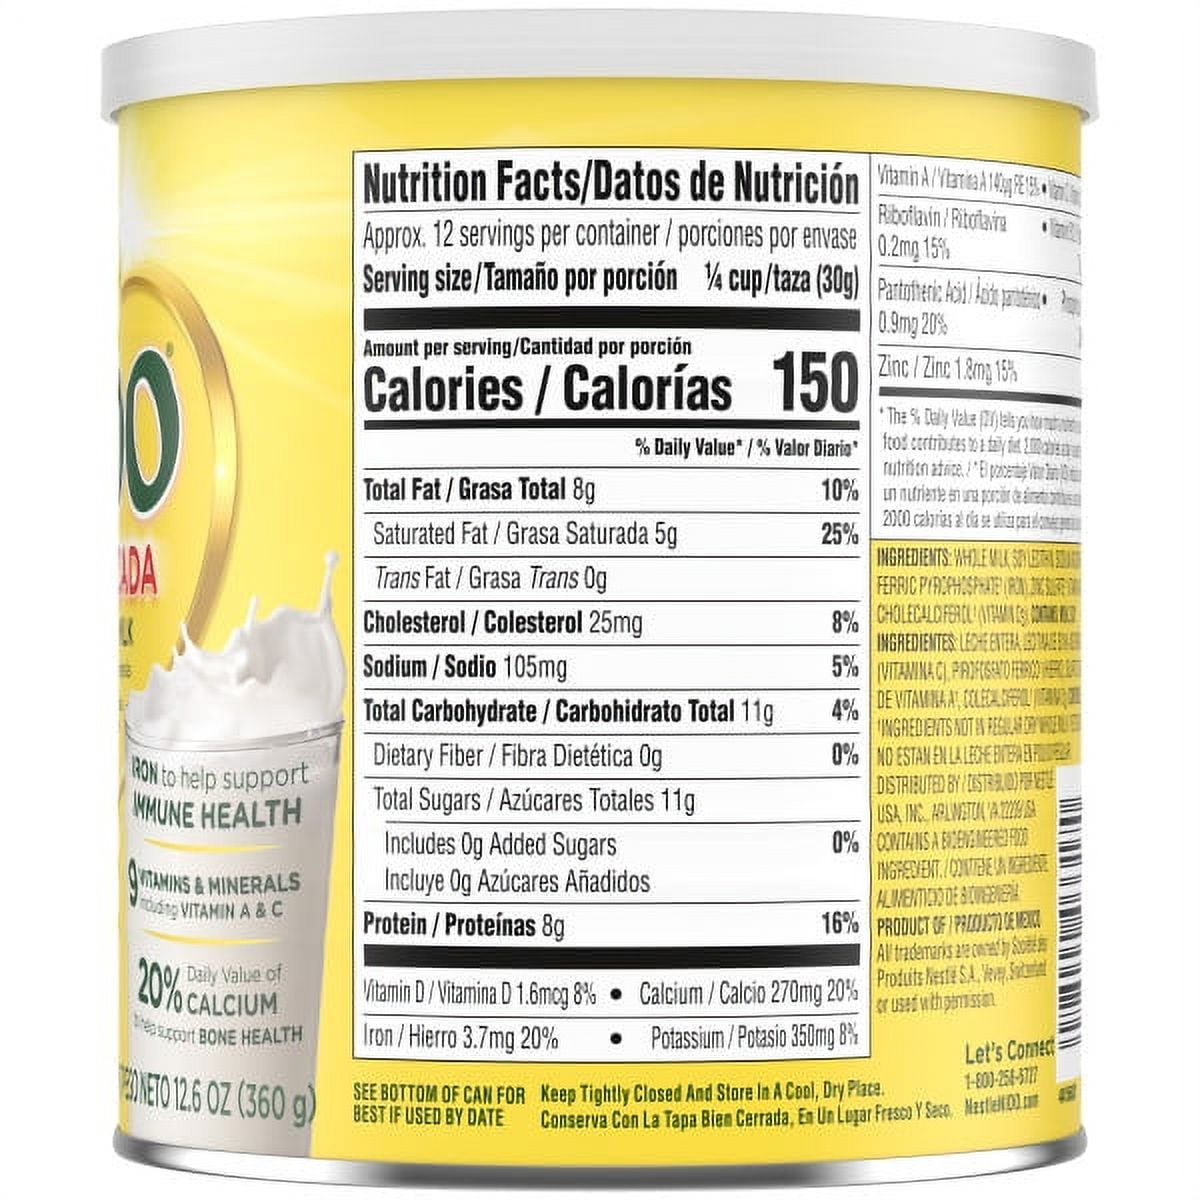 Nido Milk Nutrition Facts - Eat This Much